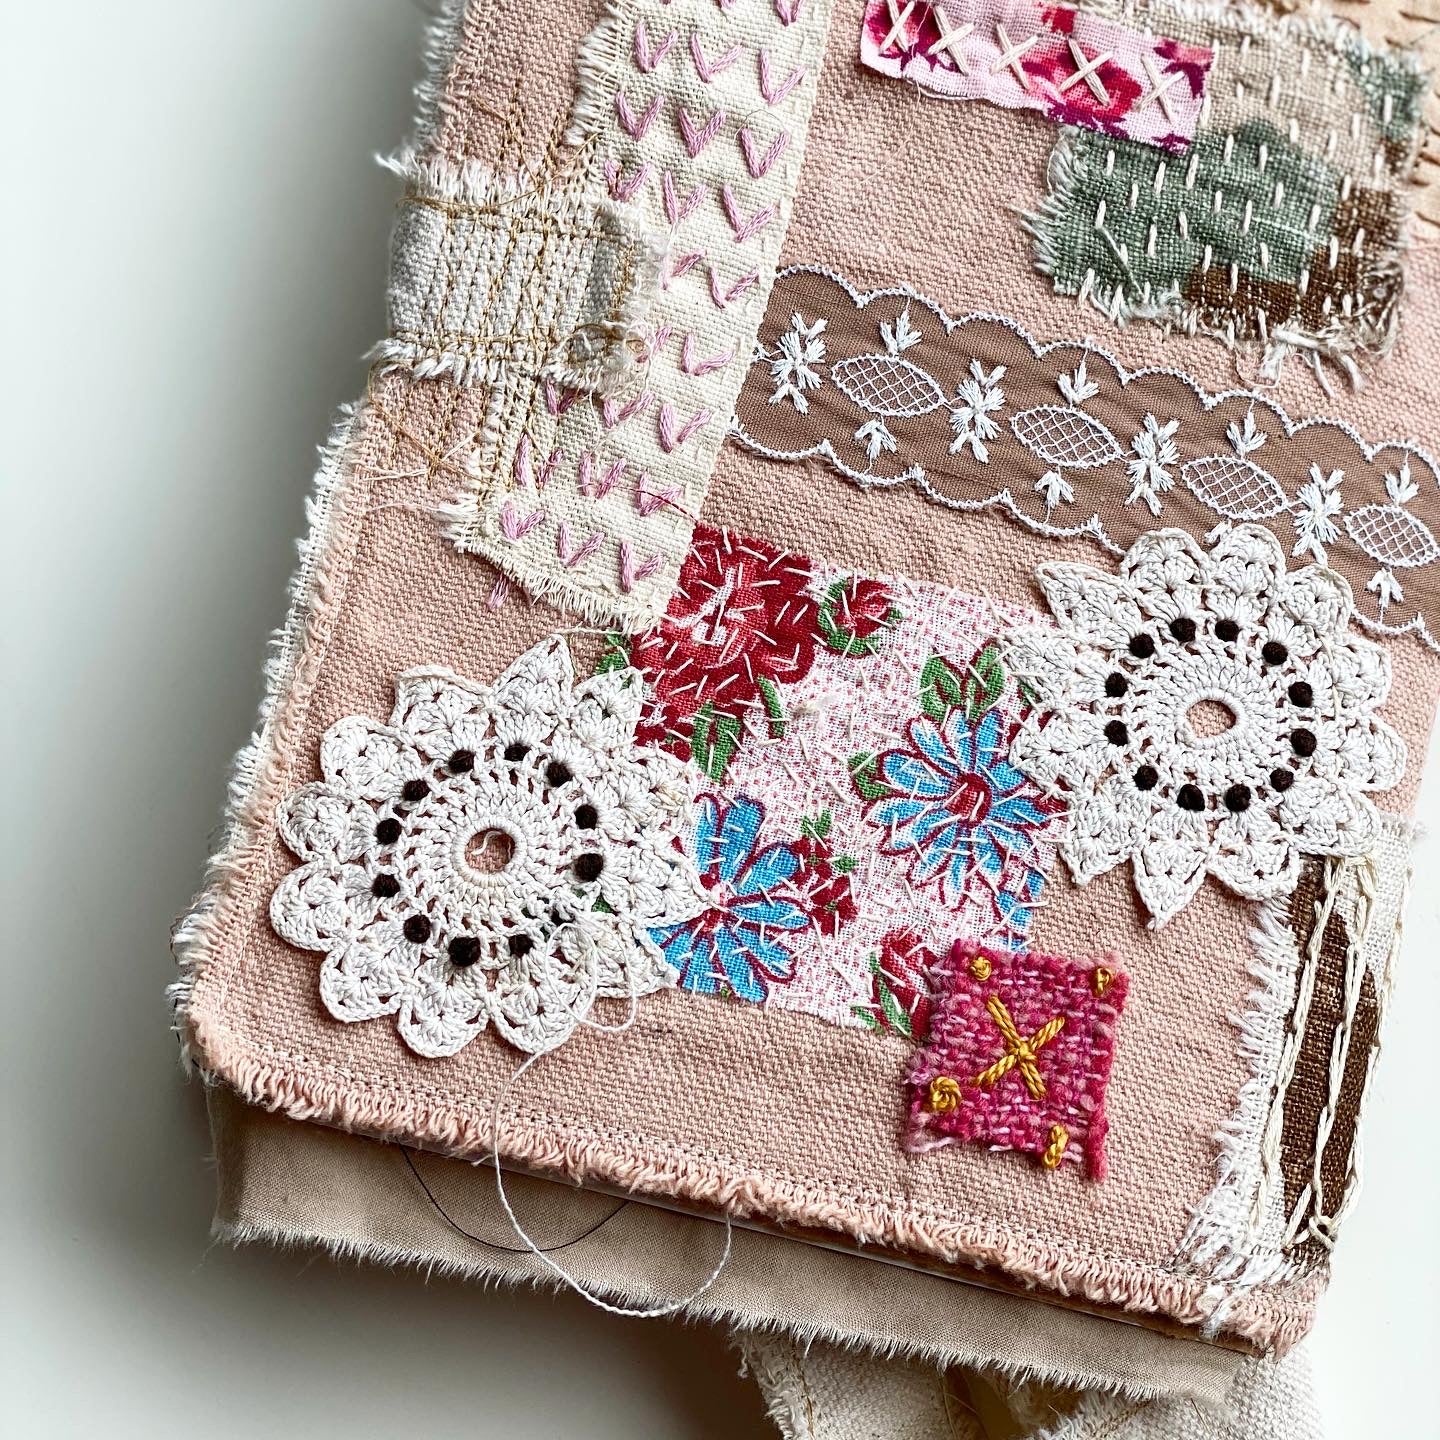 hand stitched vintage doilies on linen covered journal